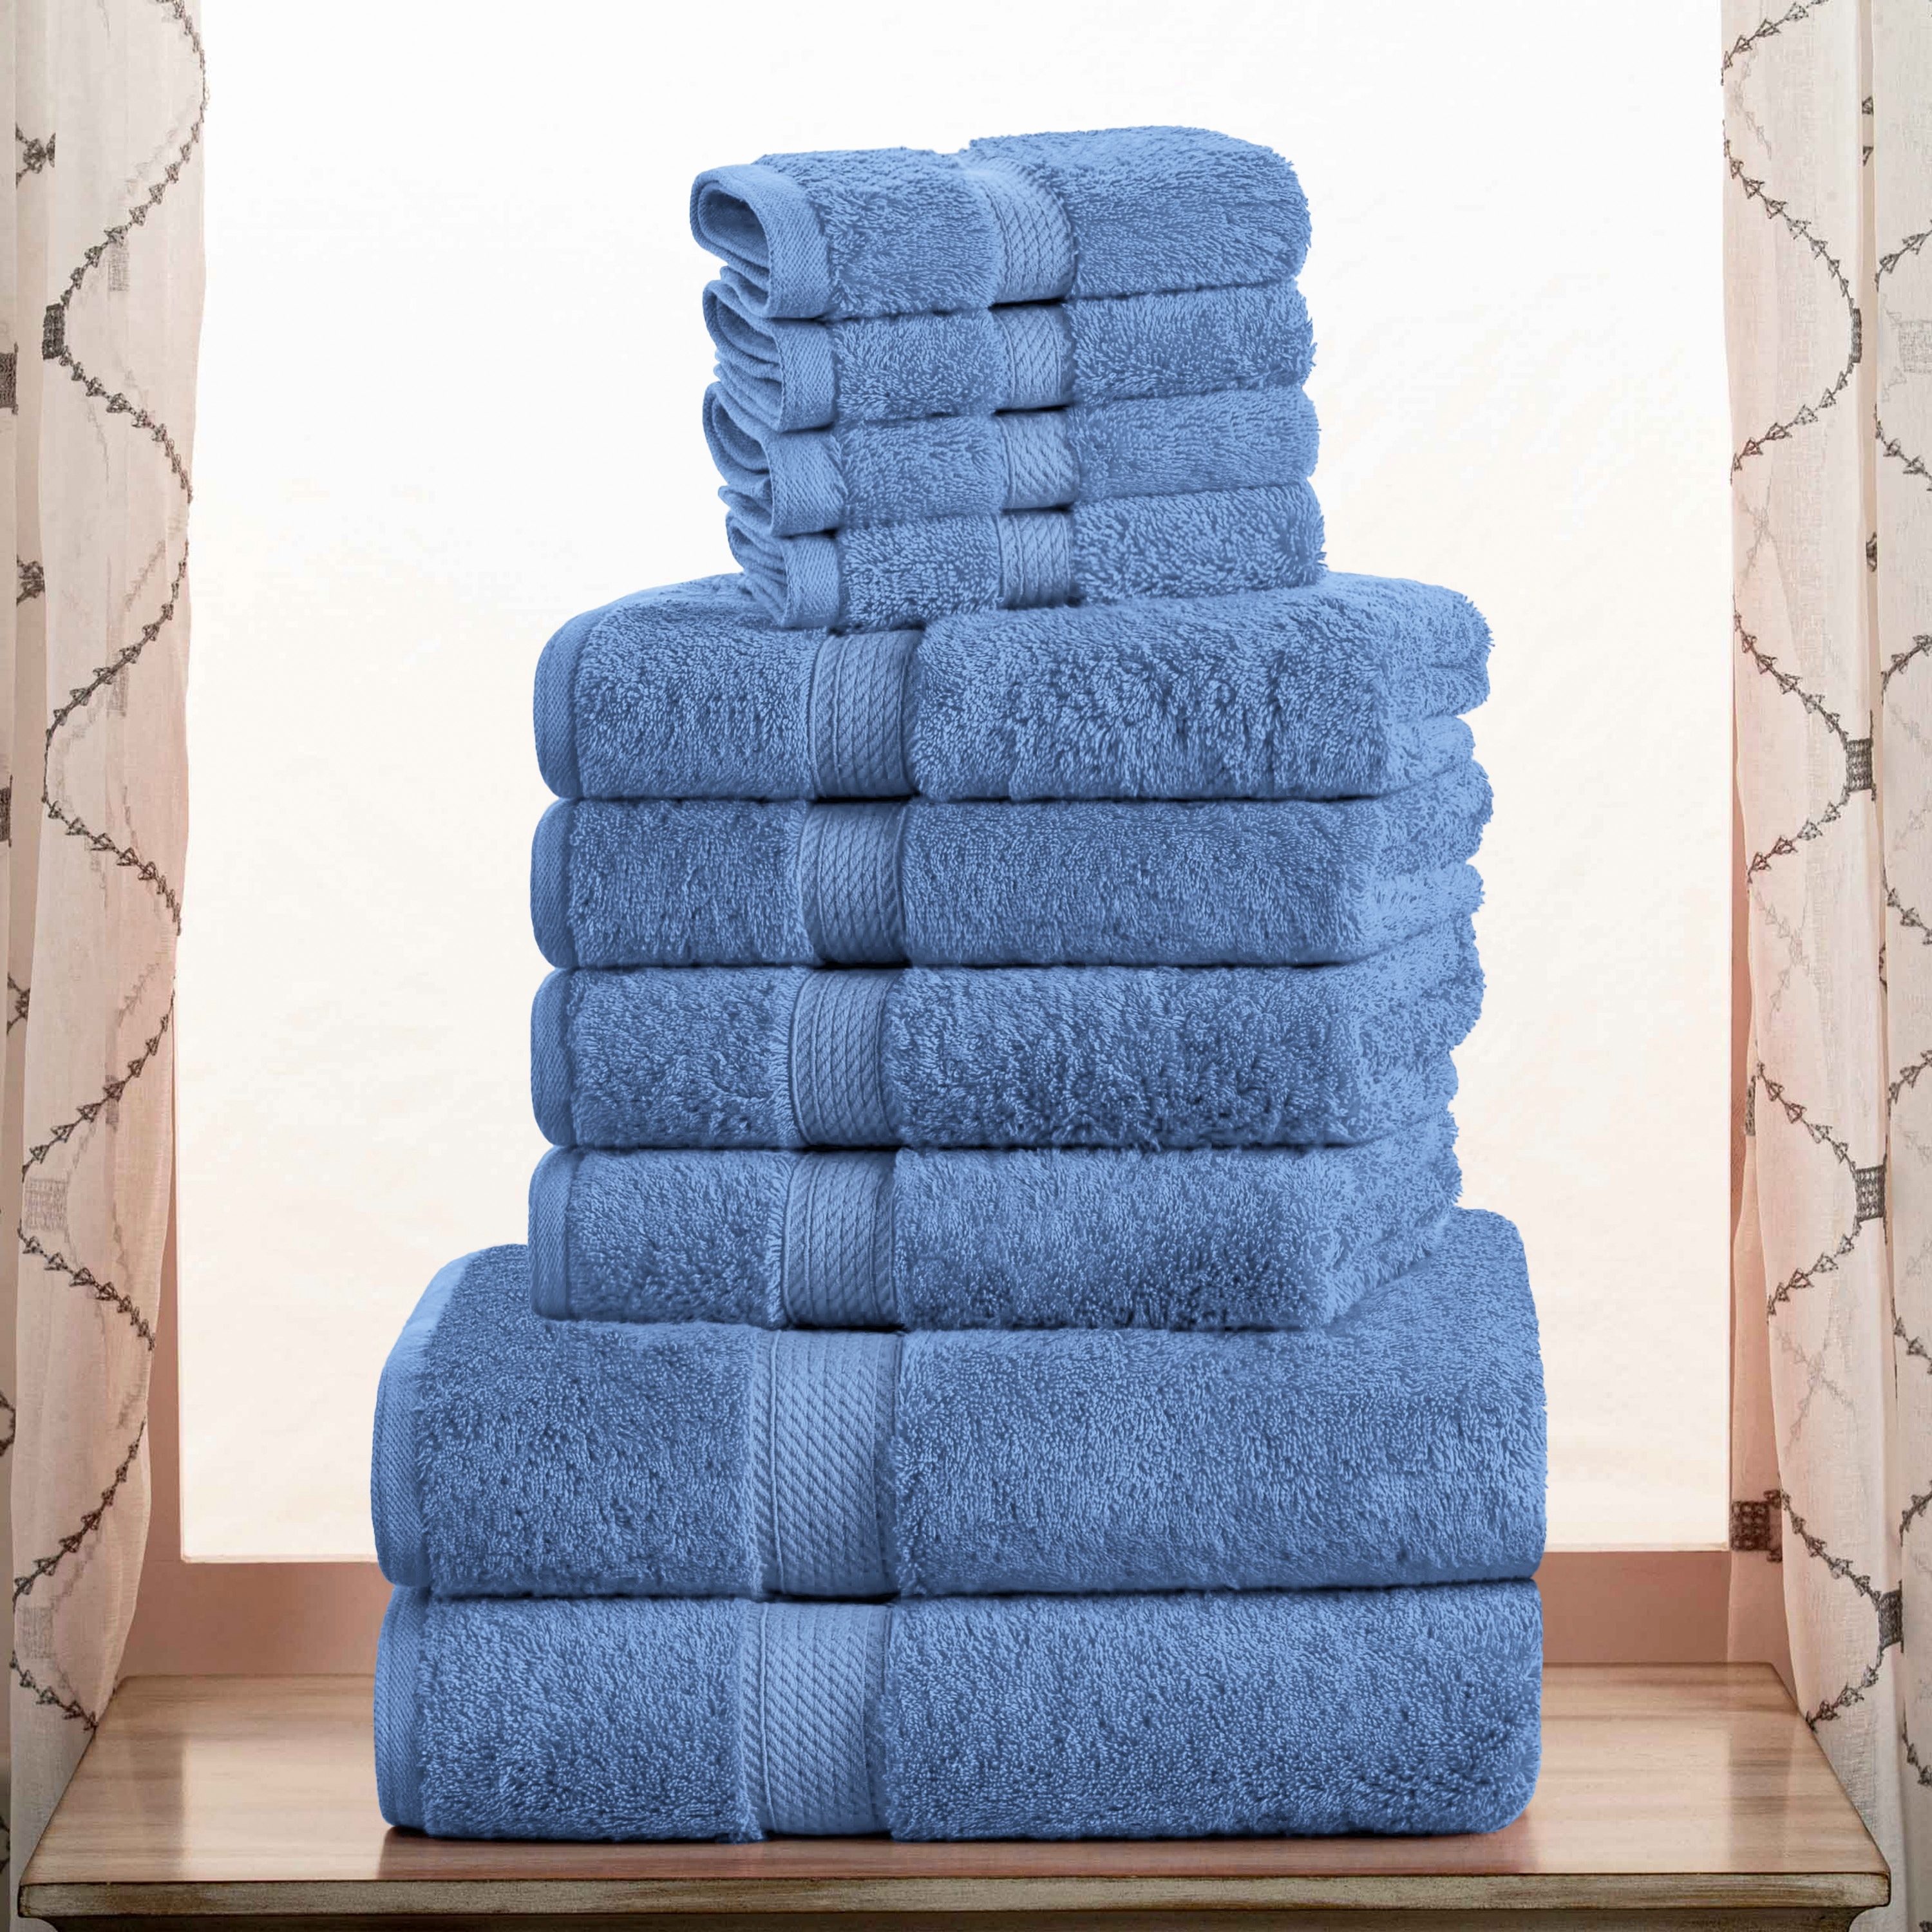 https://ak1.ostkcdn.com/images/products/is/images/direct/483358dc3447c5e55d2ef215d41683e61d628d56/Egyptian-Cotton-Heavyweight-Solid-Plush-Towel-Set-by-Superior.jpg